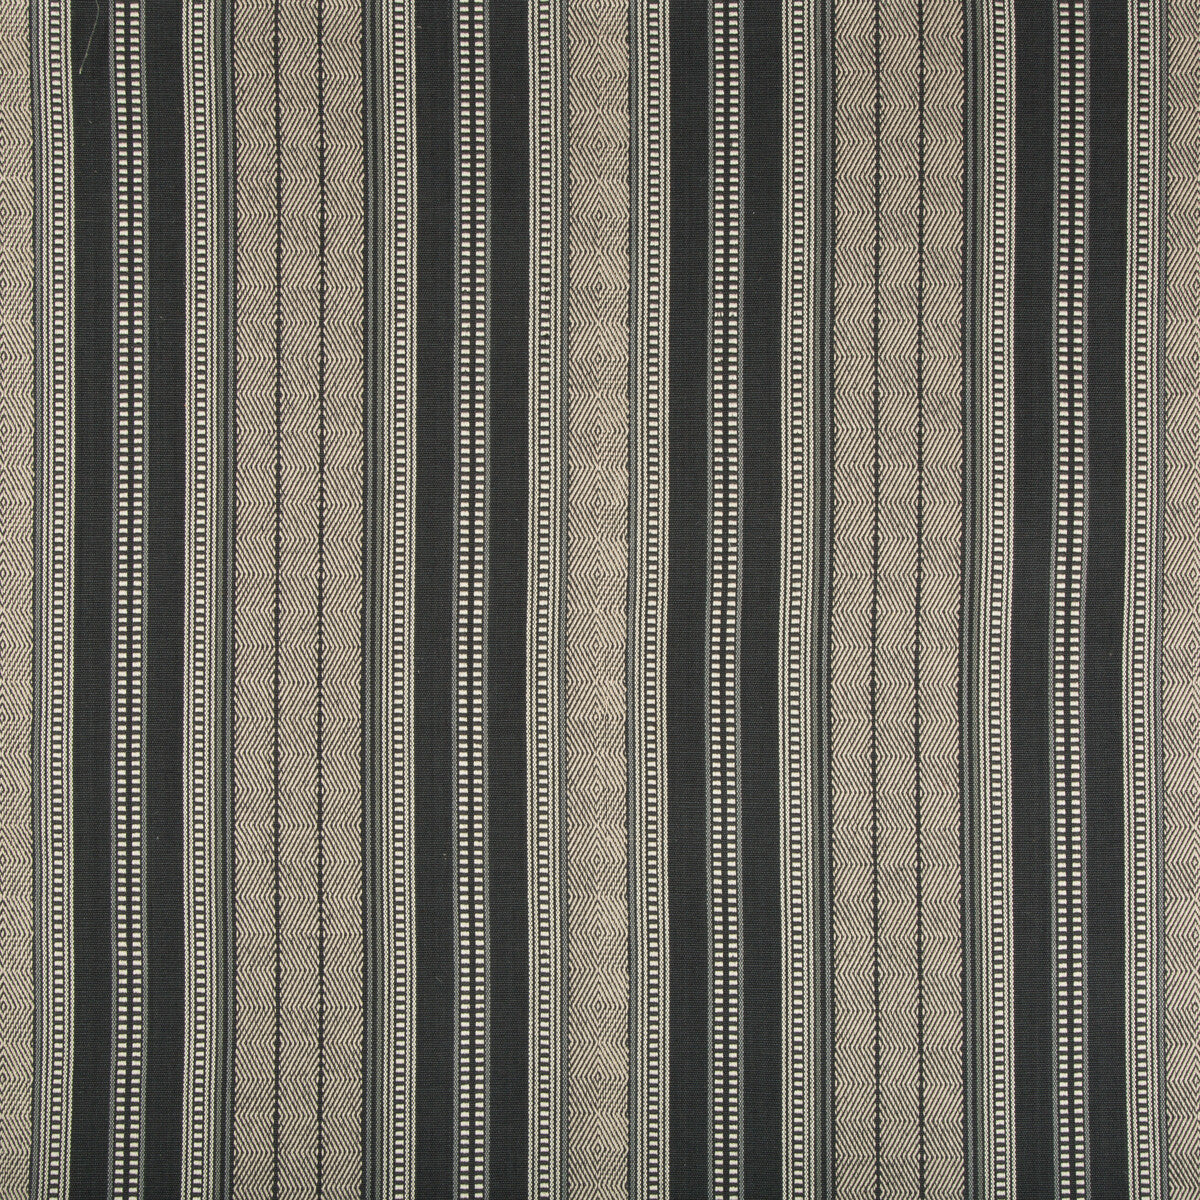 Lule Stripe fabric in ink color - pattern 34969.816.0 - by Kravet Design in the Barclay Butera Sagamore collection